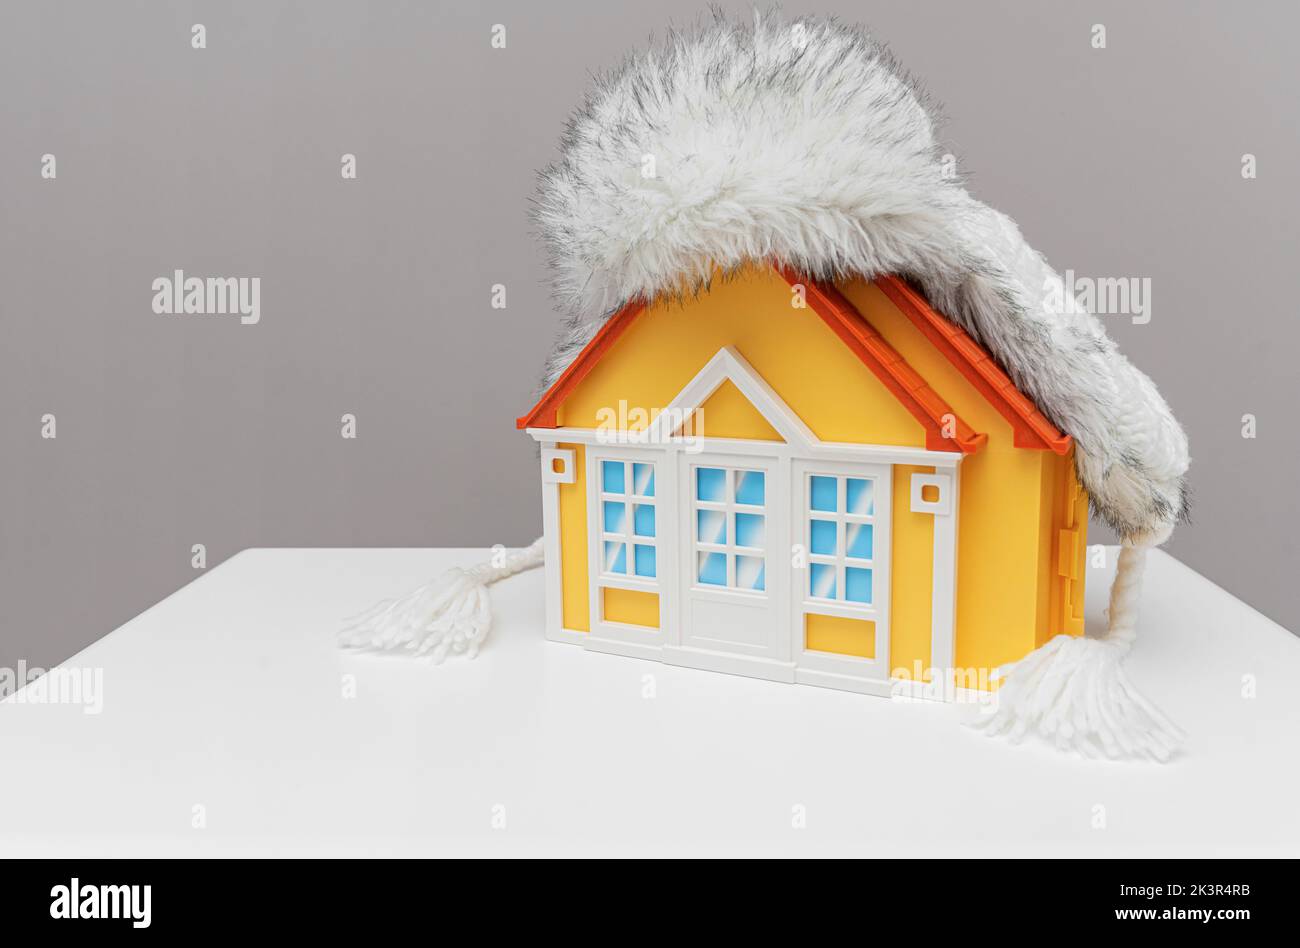 Warm hat with earflaps on the roof of the house. Stock Photo